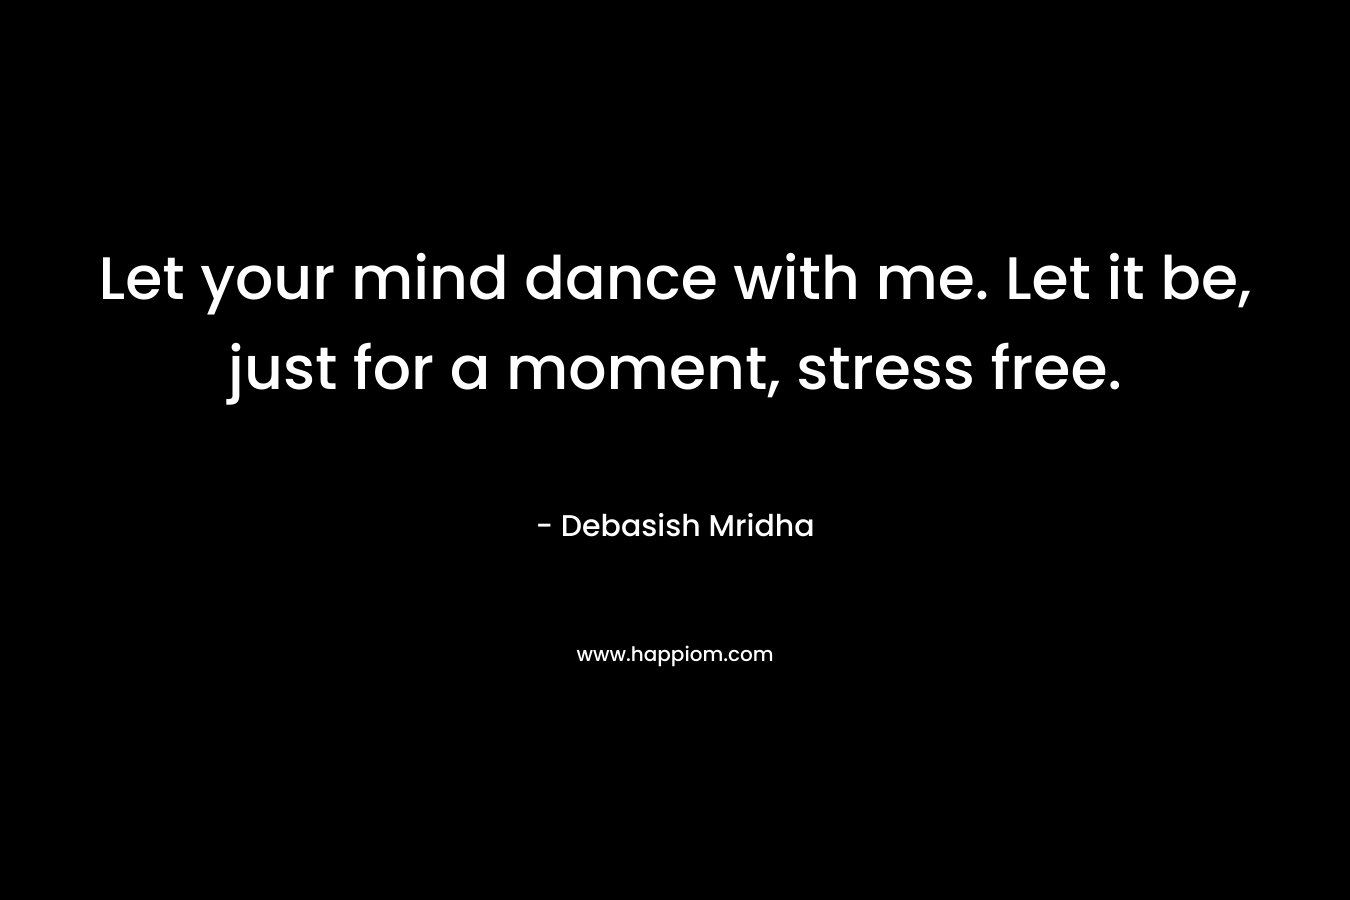 Let your mind dance with me. Let it be, just for a moment, stress free.